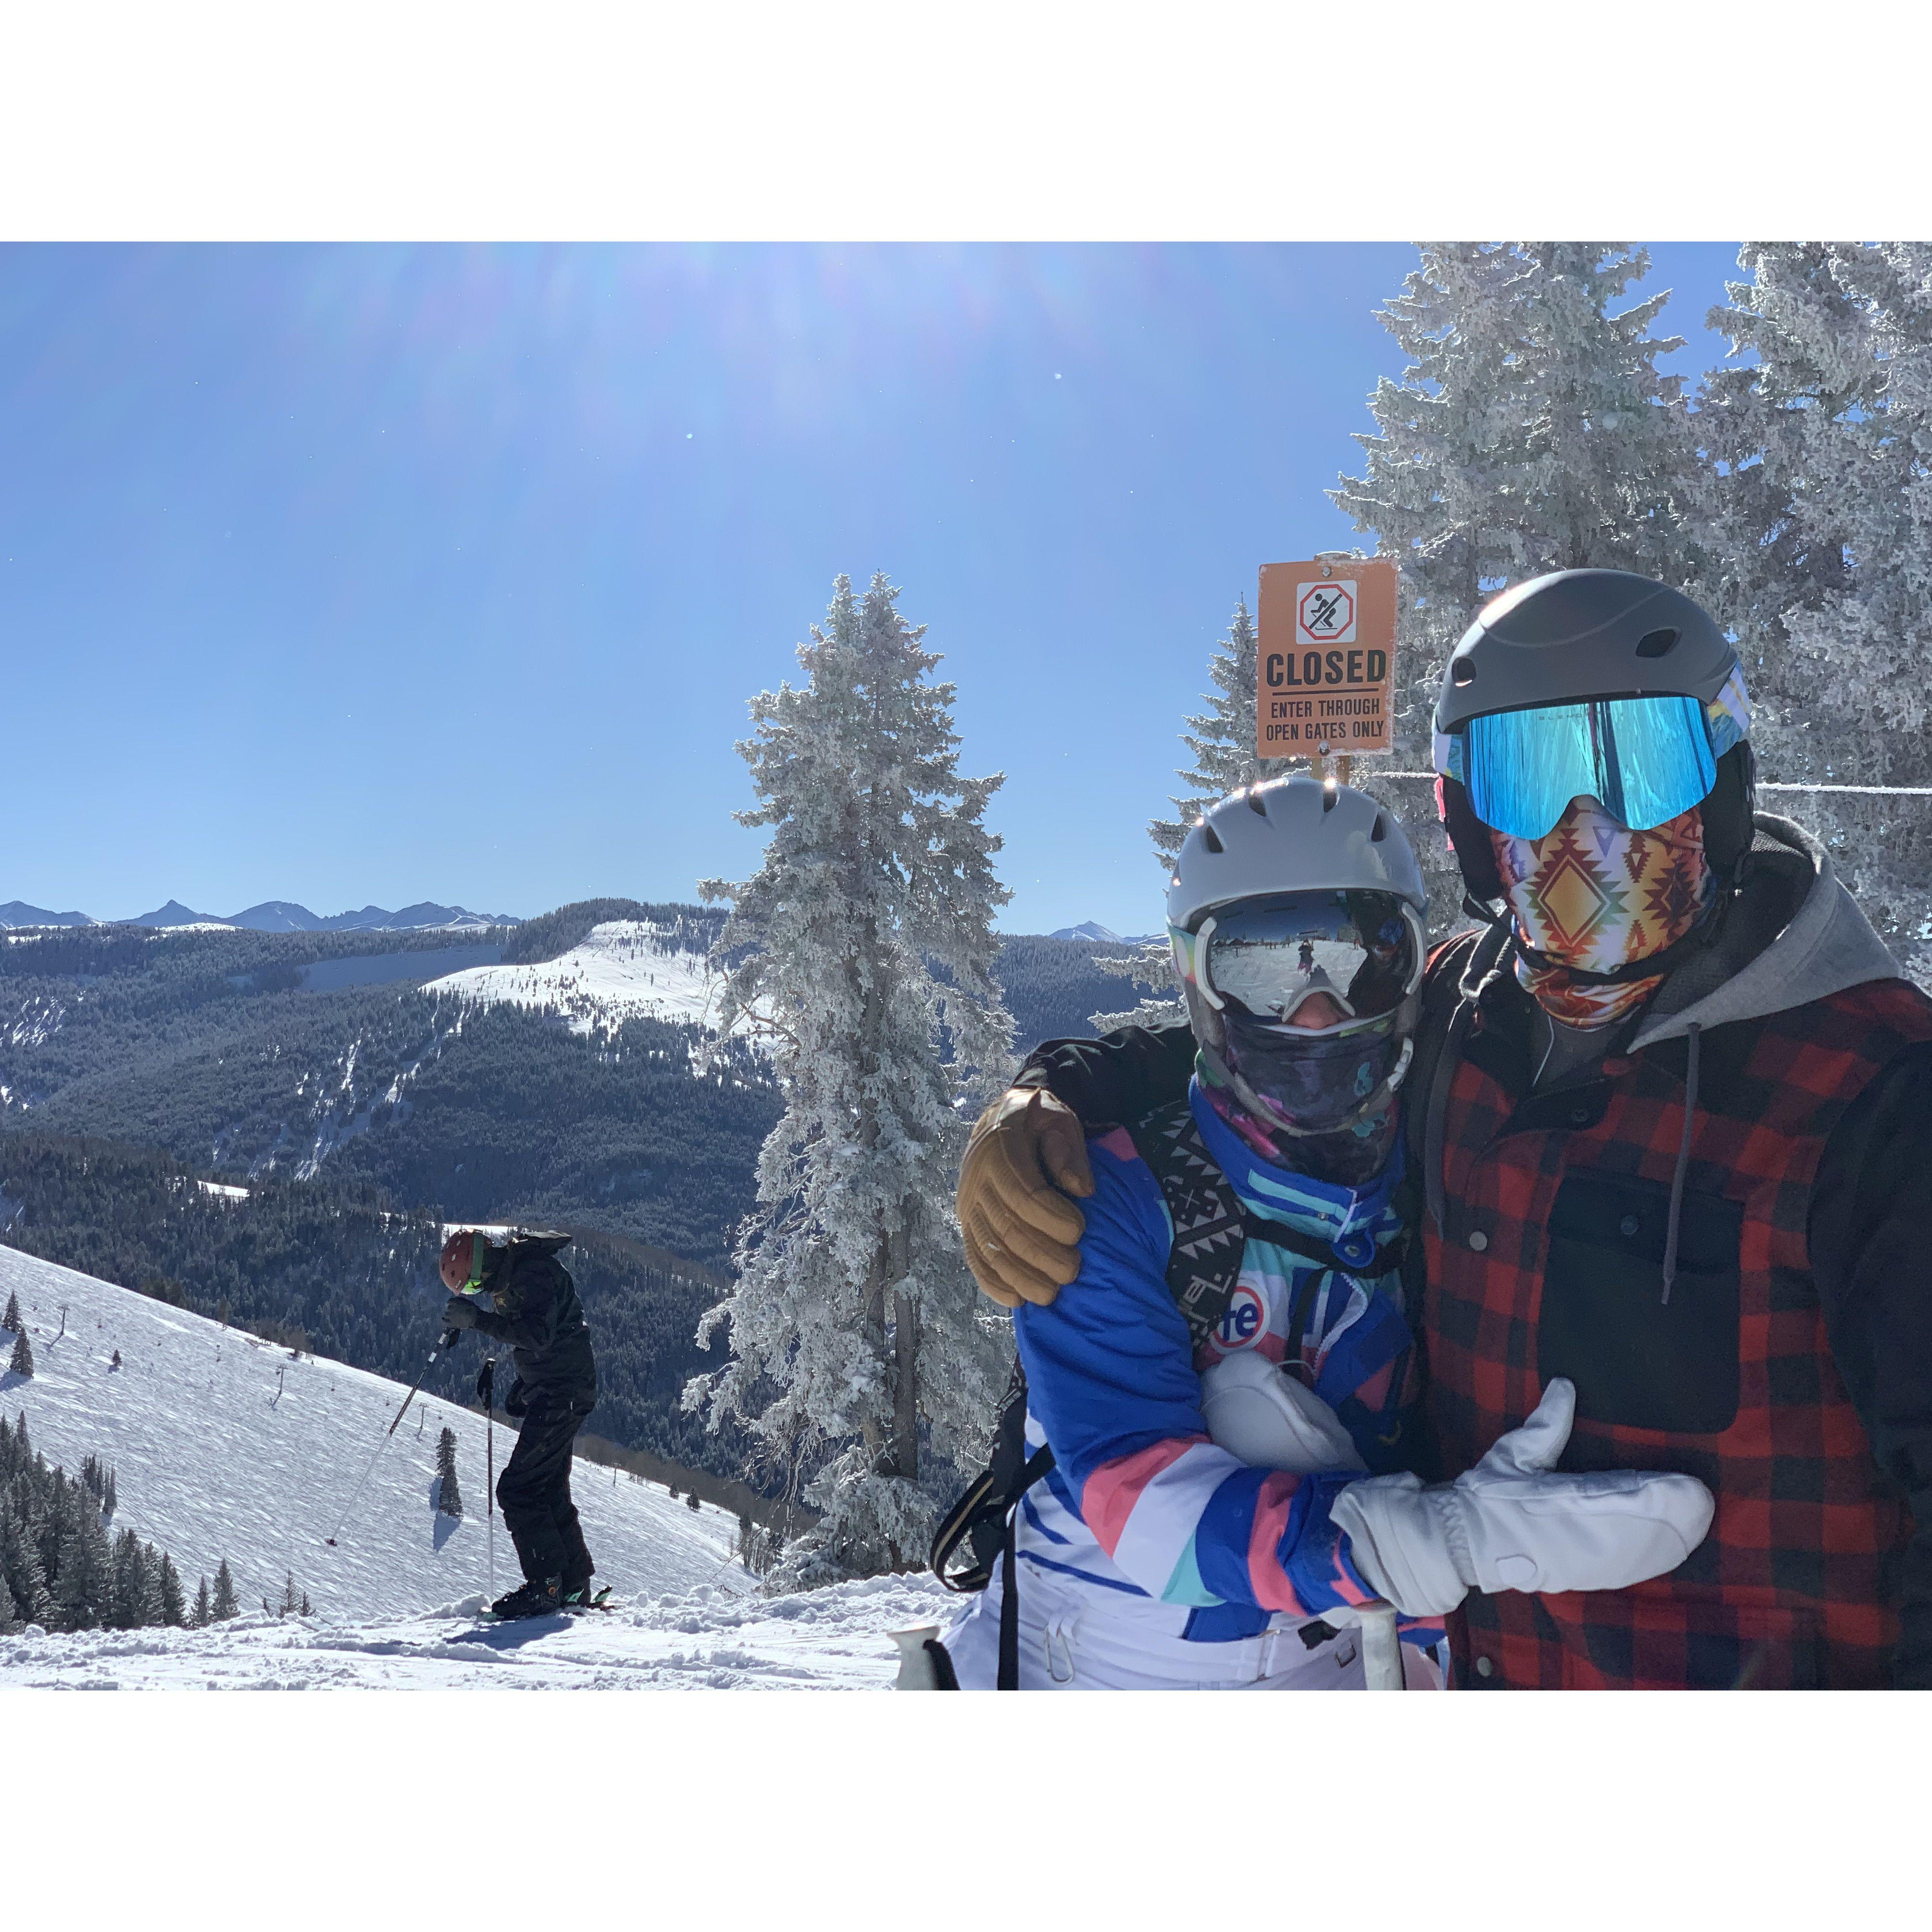 Our First year skiing at Vail together.